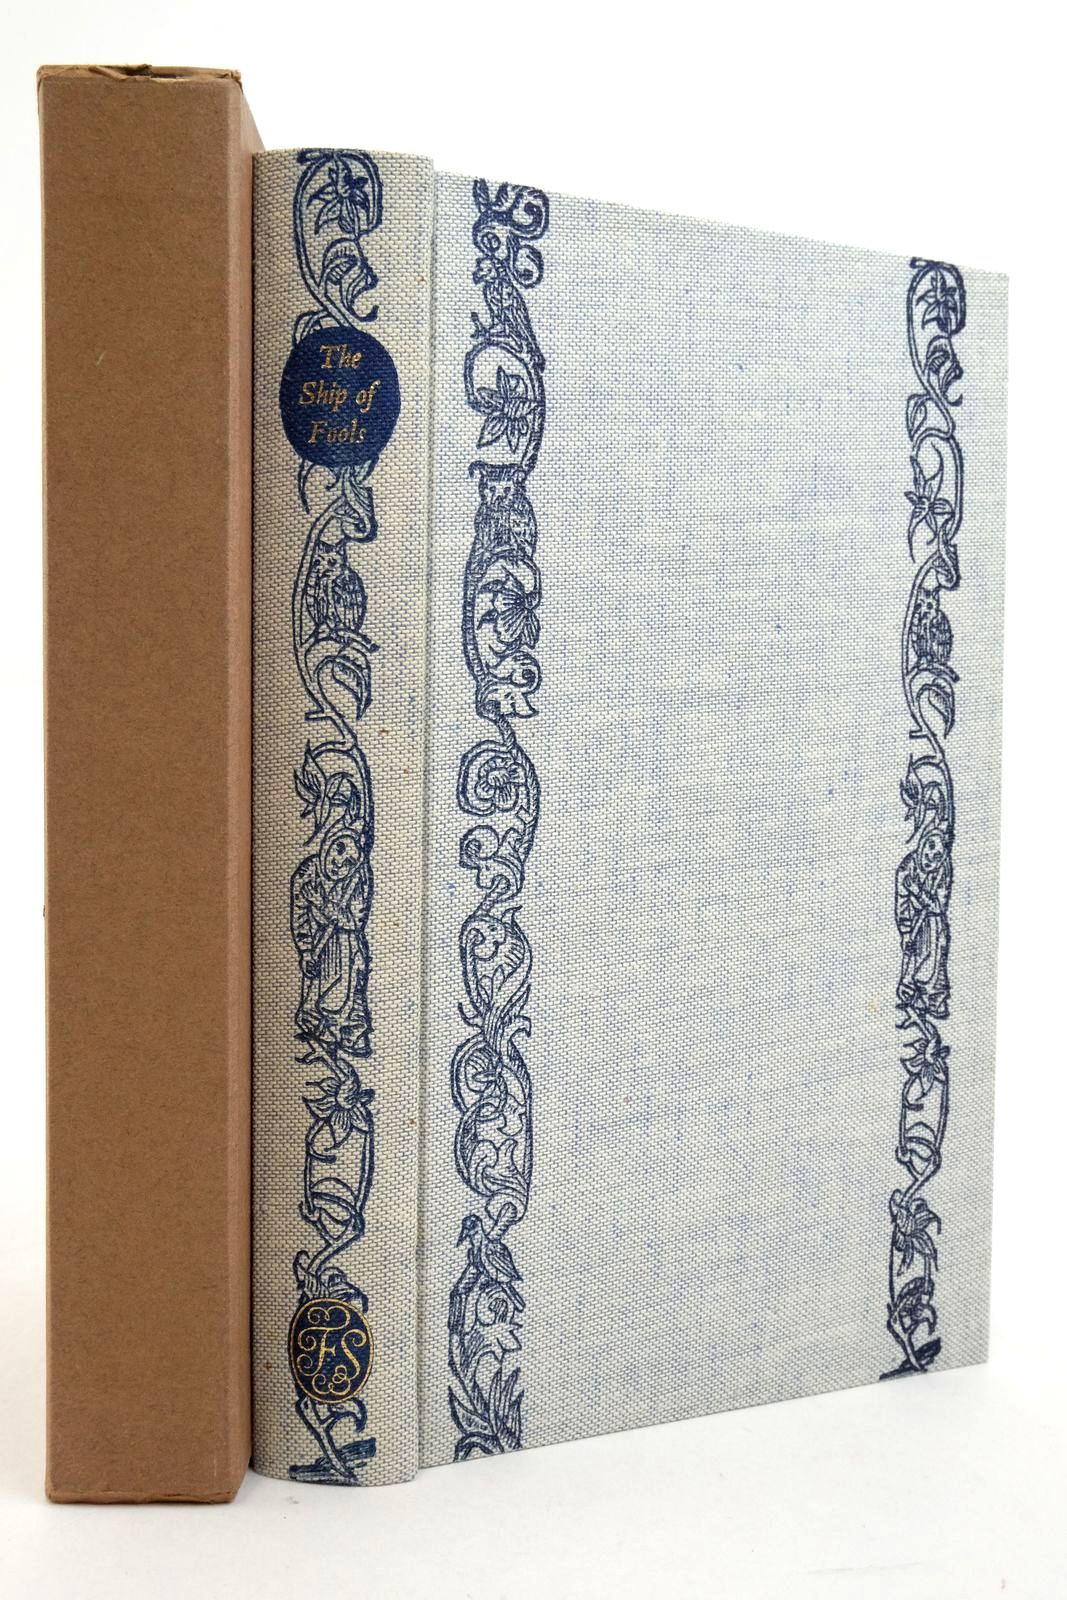 Photo of THE SHIP OF FOOLS written by Brant, Sebastian Gillis, William published by Folio Society (STOCK CODE: 2138373)  for sale by Stella & Rose's Books